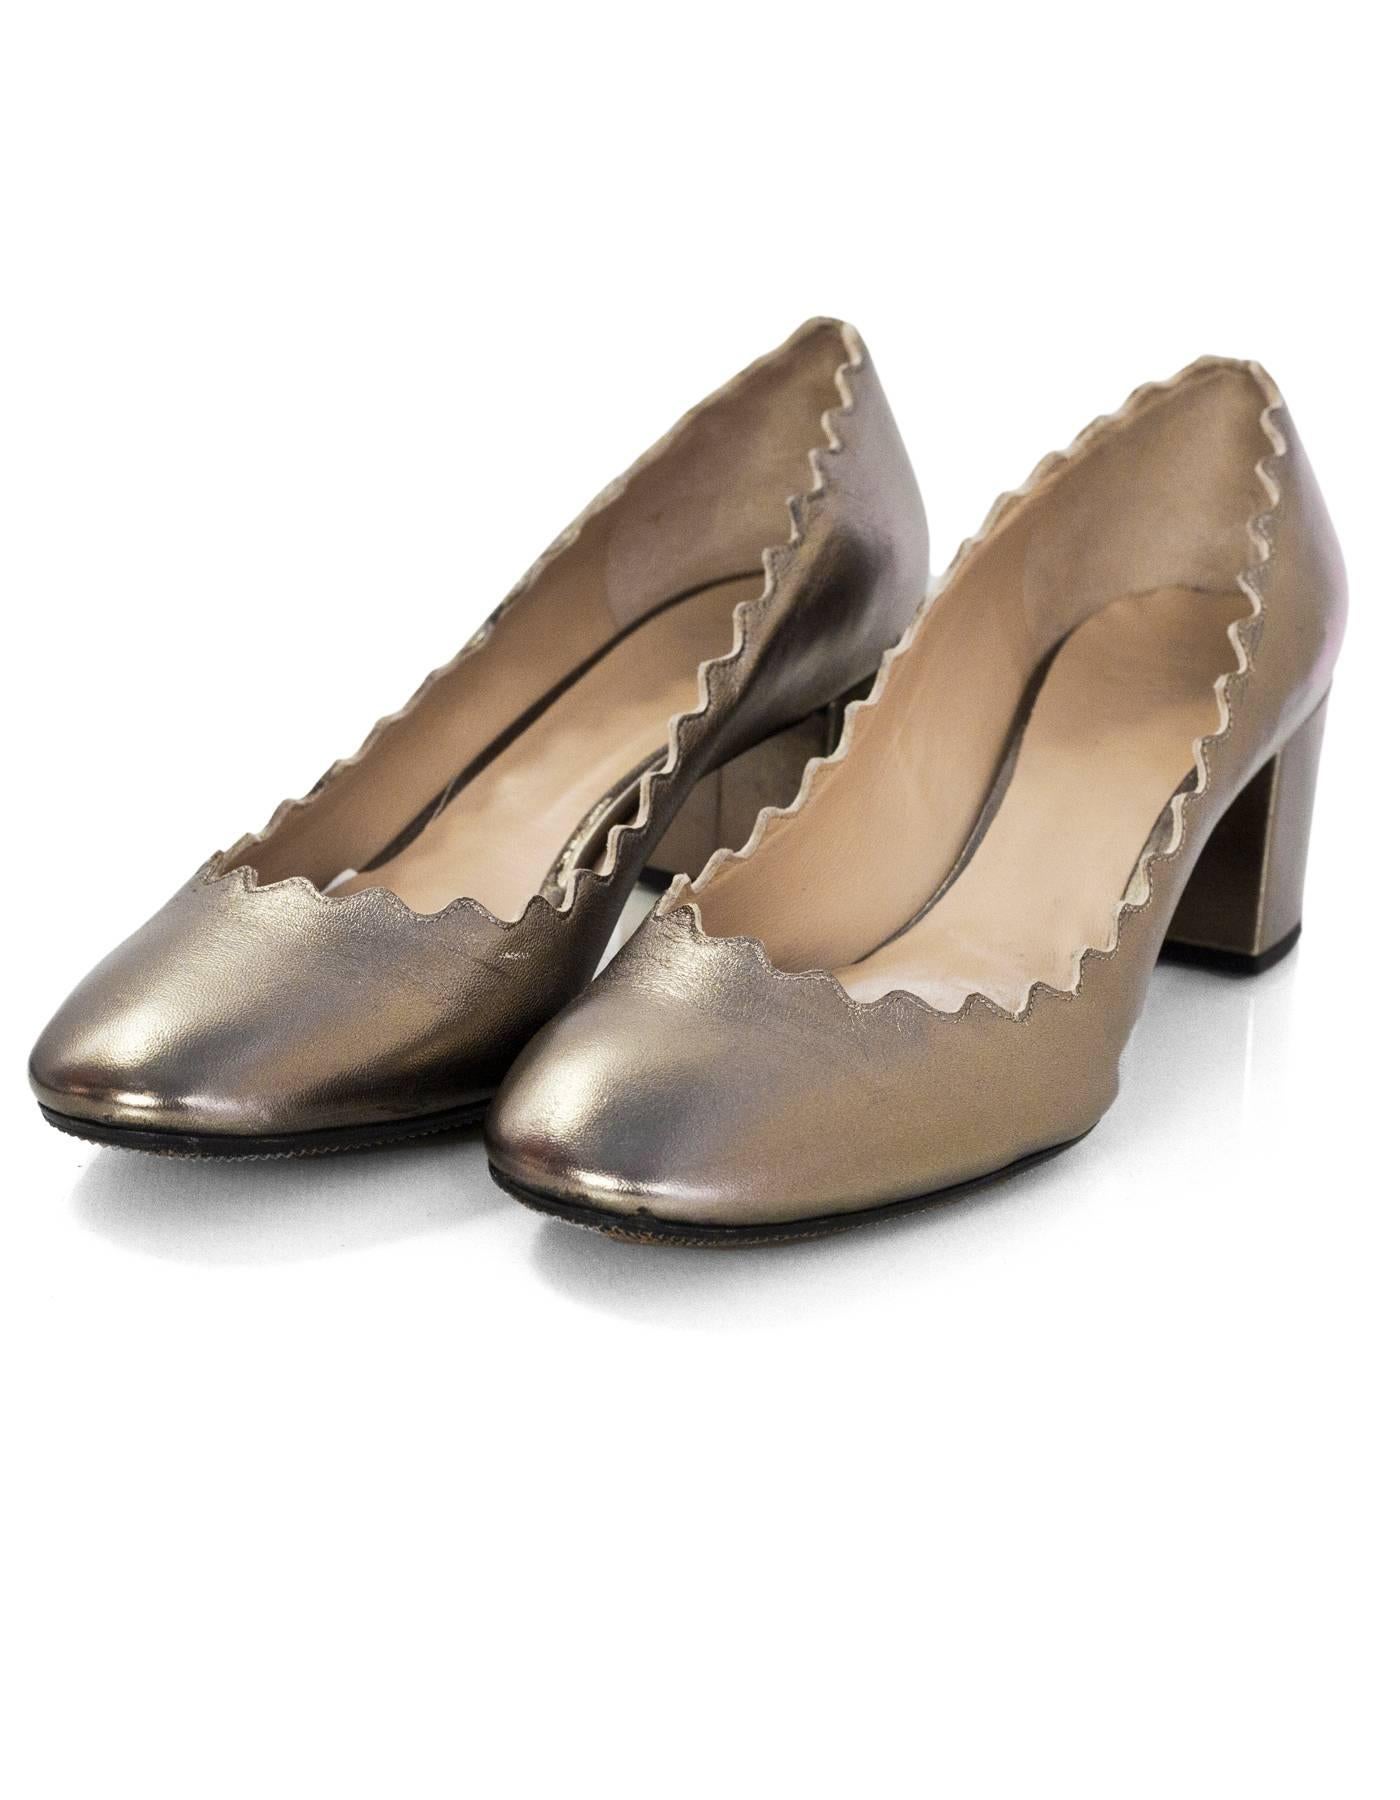 Chloe Bronze Leather Scalloped Lauren Pumps Sz 39

Made In: Italy
Color: Bronze
Materials: Leather
Closure/Opening: Slide on
Sole Stamp: Chloe made in italy 39
Retail Price: $575 + tax
Overall Condition: Very good pre-owned condition with the